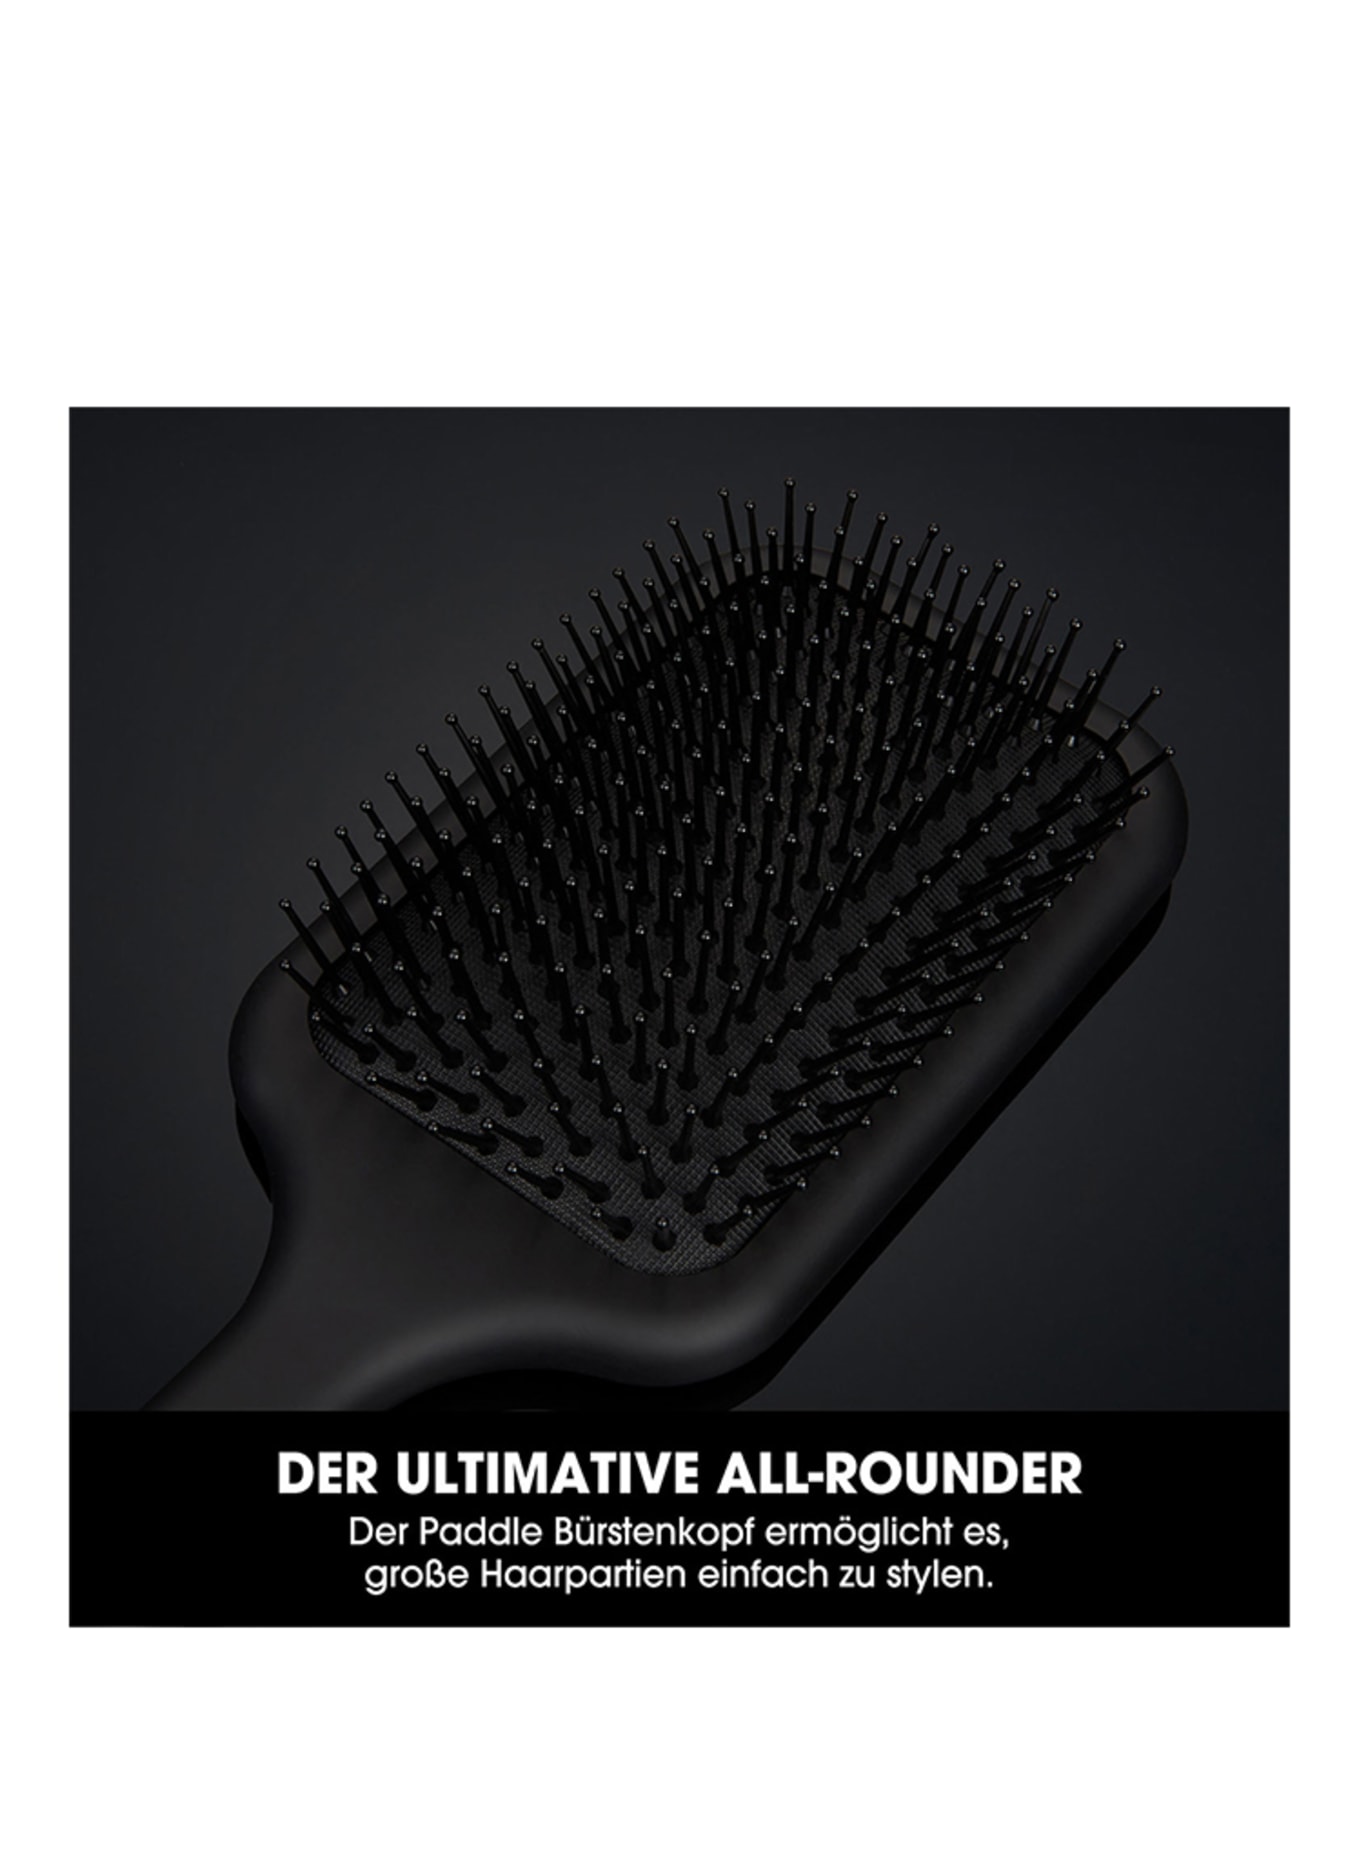 ghd THE ALL-ROUNDER (Bild 3)